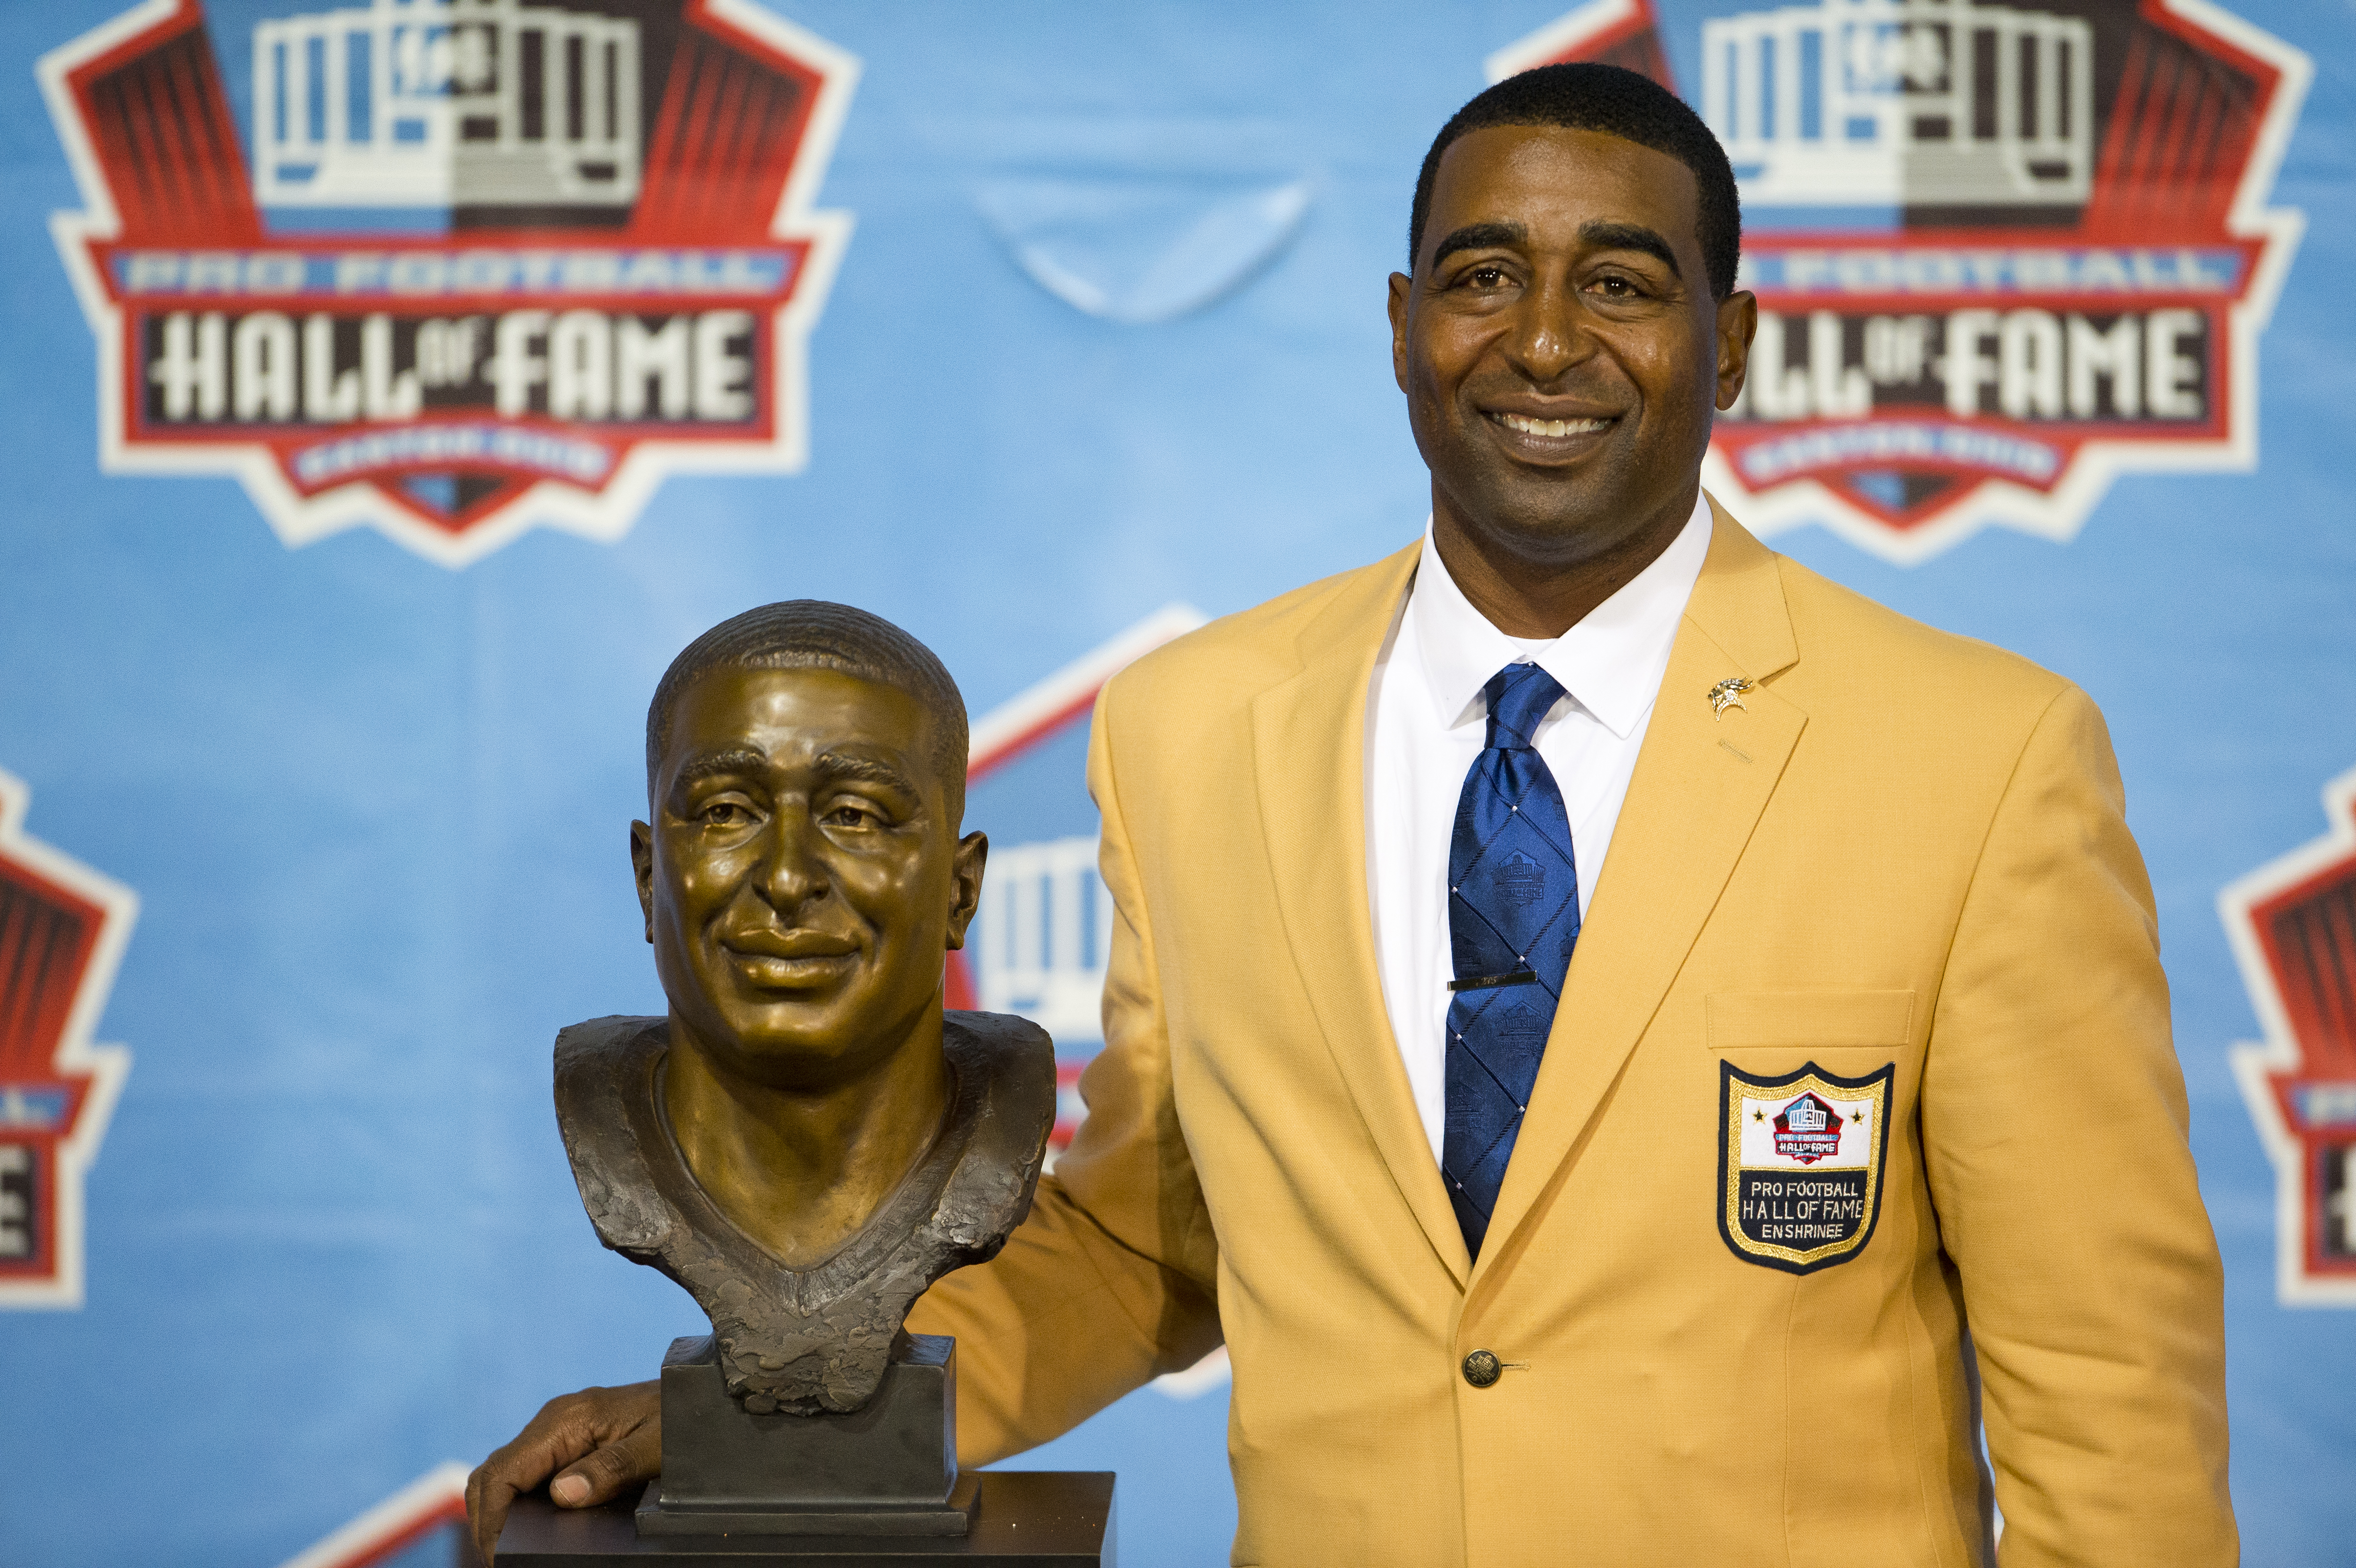 CANTON, OH - AUGUST 3: Former receiver Cris Carter of the Minnesota Vikings poses with his bust during the NFL Class of 2013 Enshrinement Ceremony at Fawcett Stadium on Aug. 3, 2013 in Canton, Ohio. (Photo by Jason Miller/Getty Images)